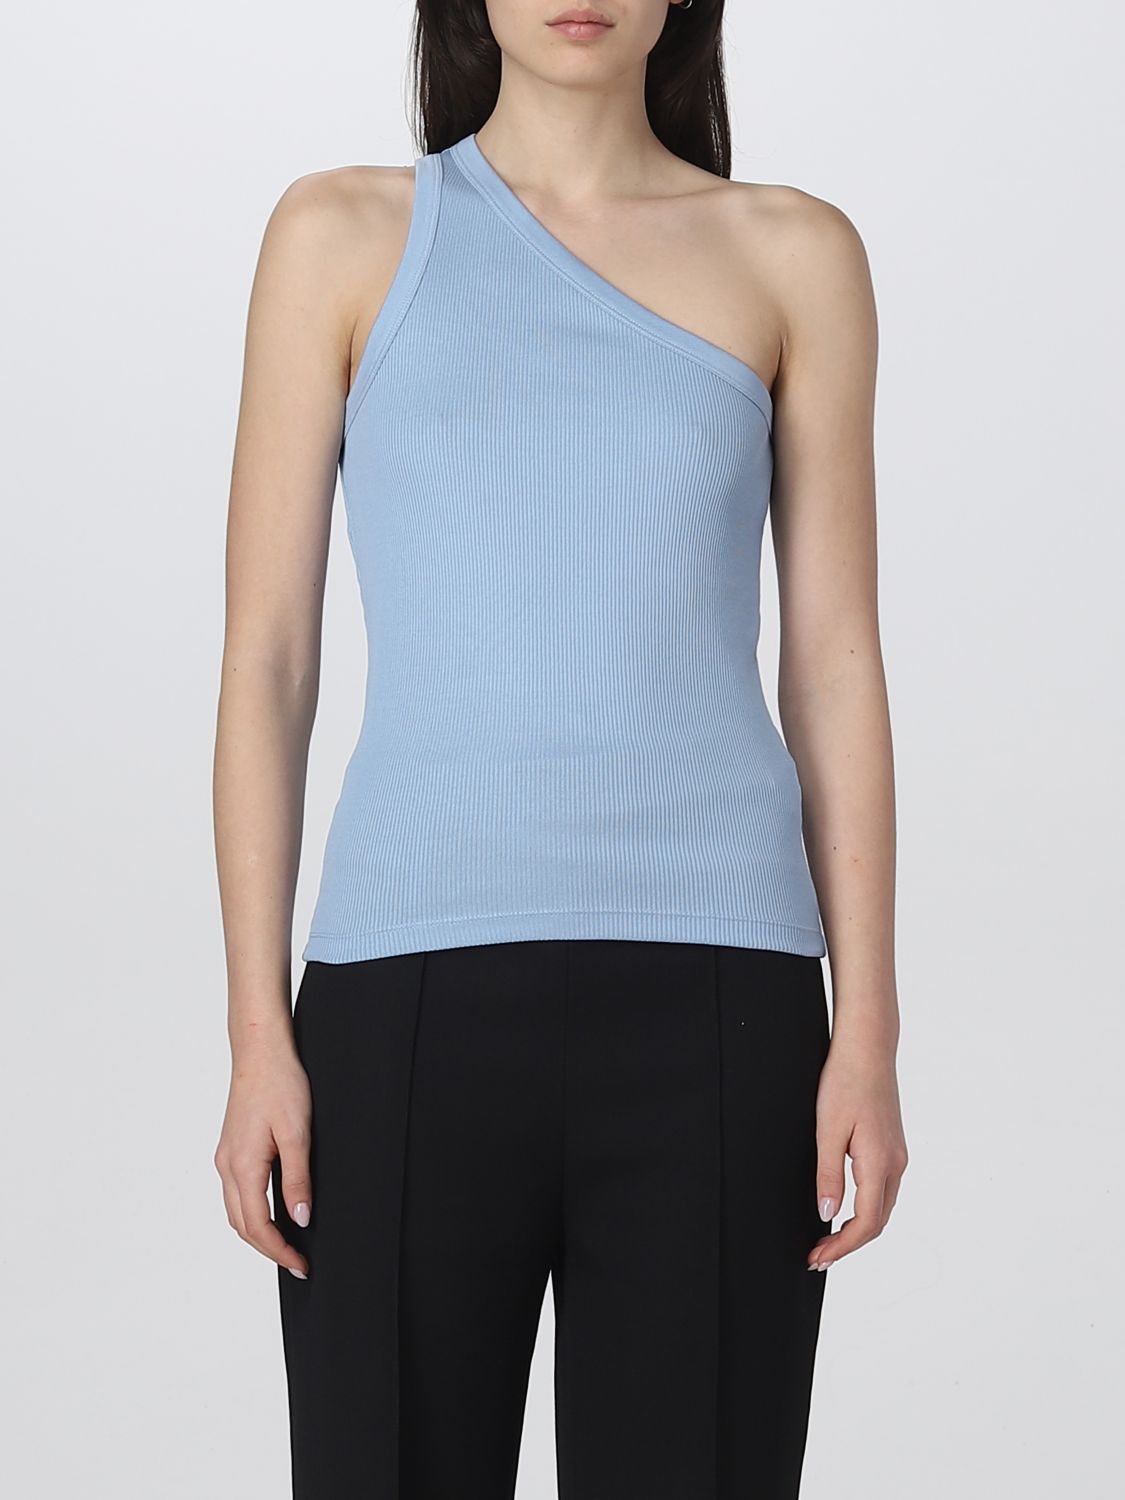 ROHE TOP ROHE WOMAN COLOR GNAWED BLUE,D98460011